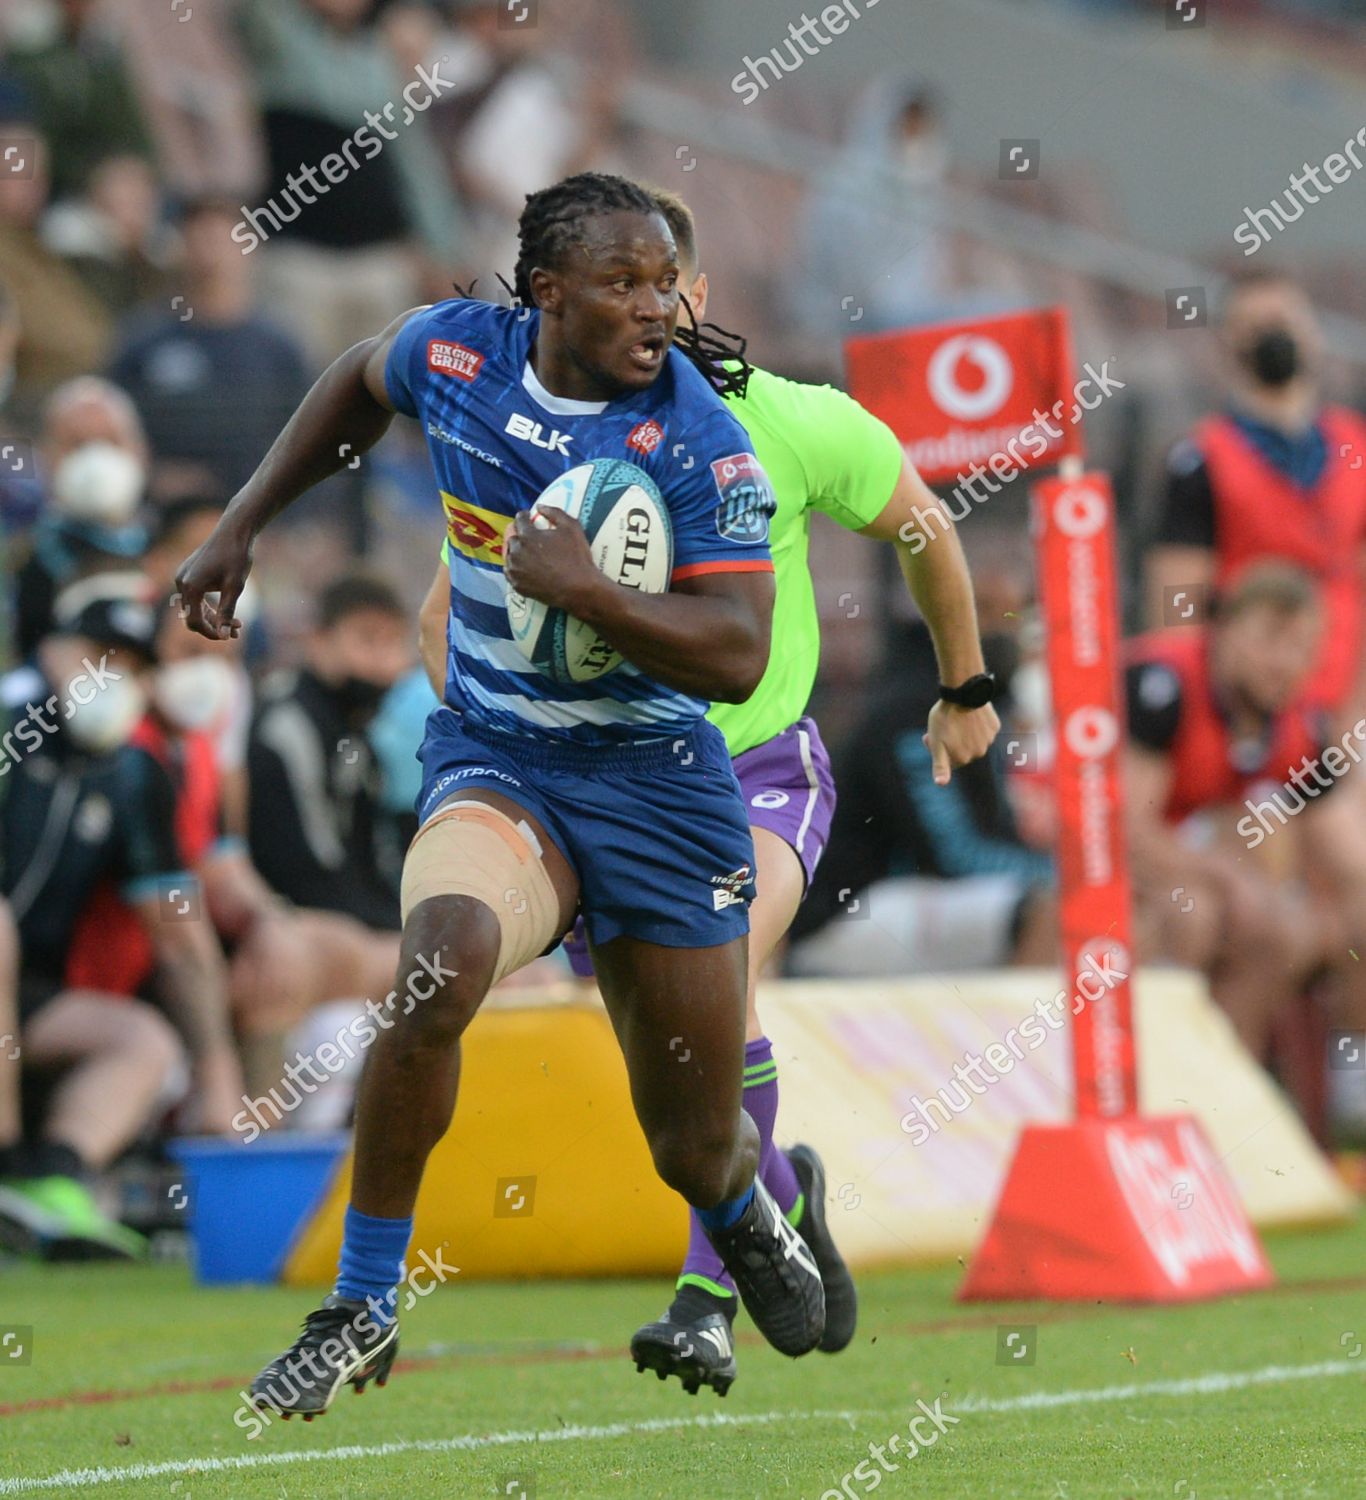 Seabelo Senatla Stormers During United Rugby Editorial Stock Photo